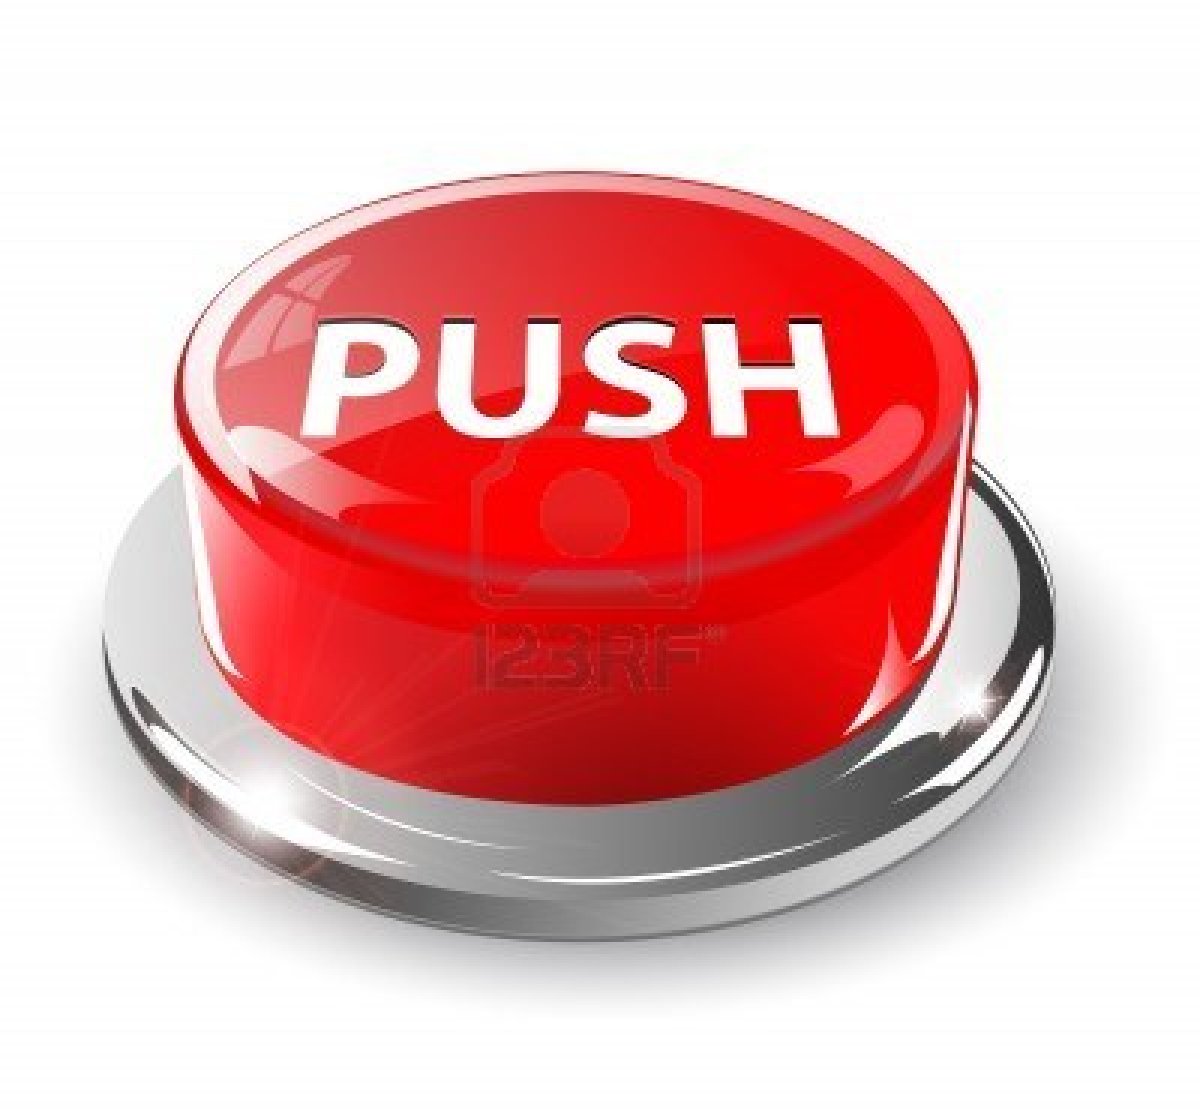 Red button фирма. Red button left 3. Красная/кнопка вацап.